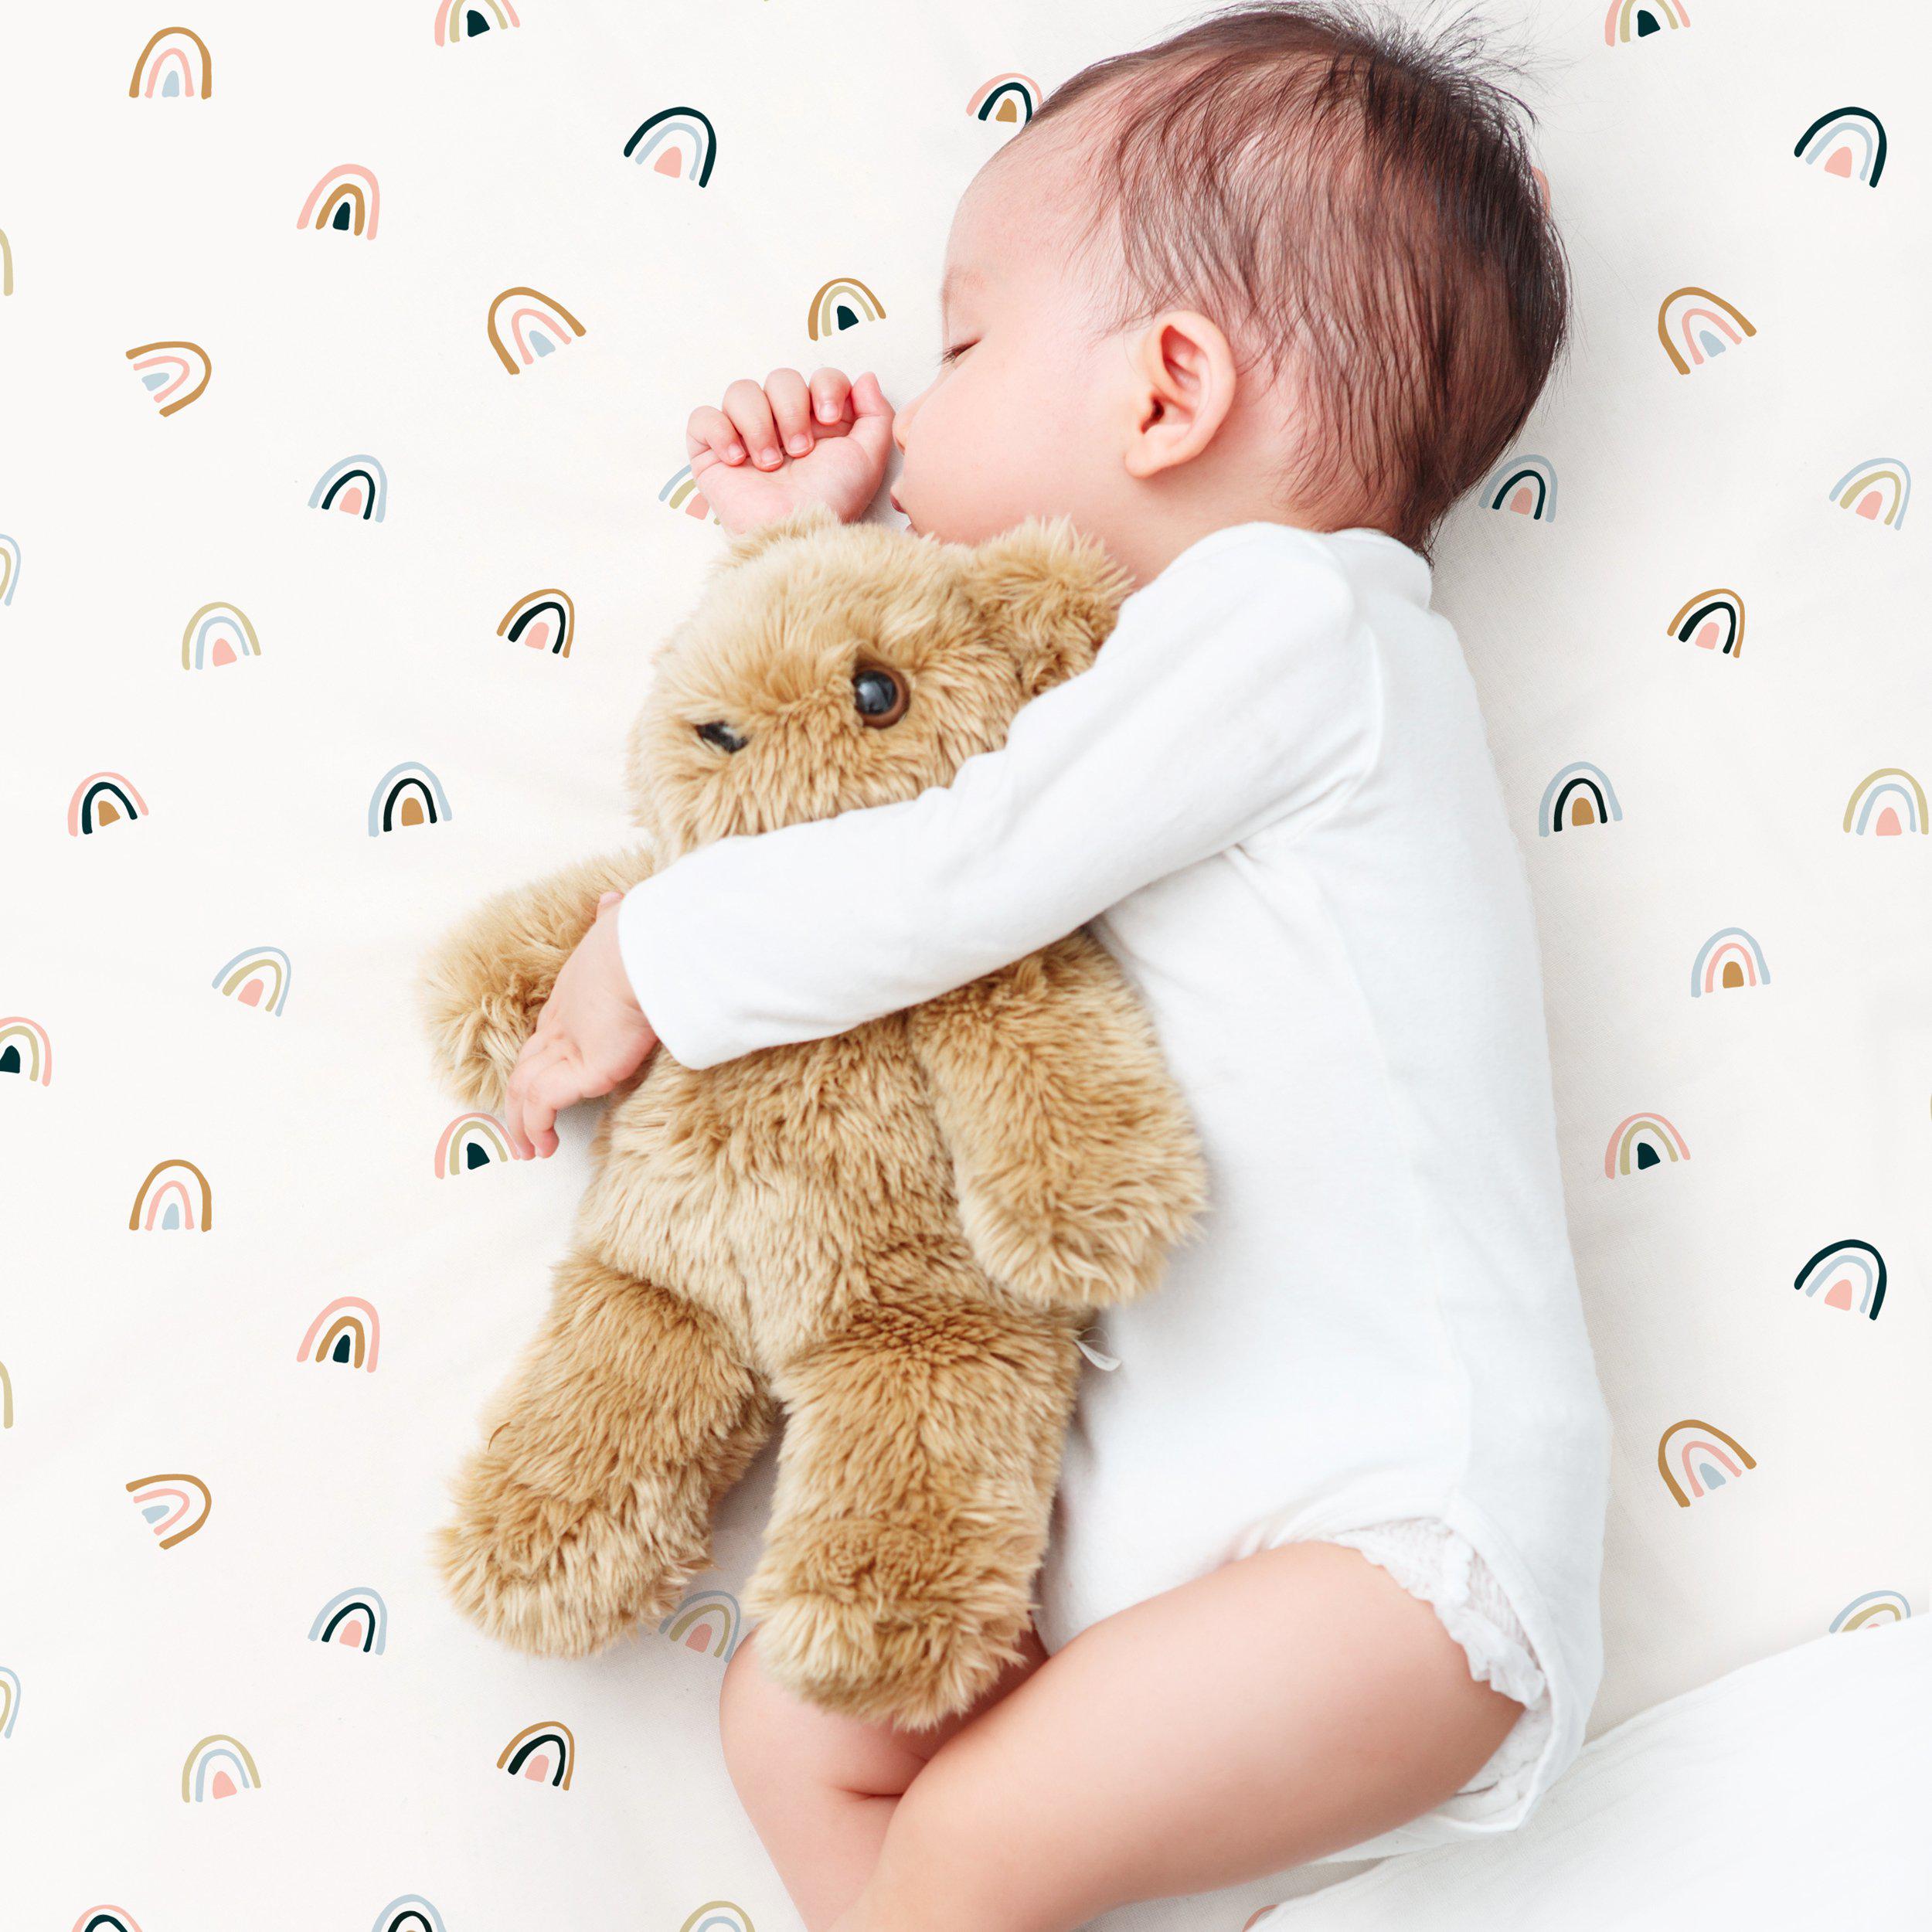 A baby peacefully sleeping while hugging a soft teddy bear, on a light background decorated with the Makemake Organics Crib Fitted Sheet with Pillowcase - Over The Rainbow.